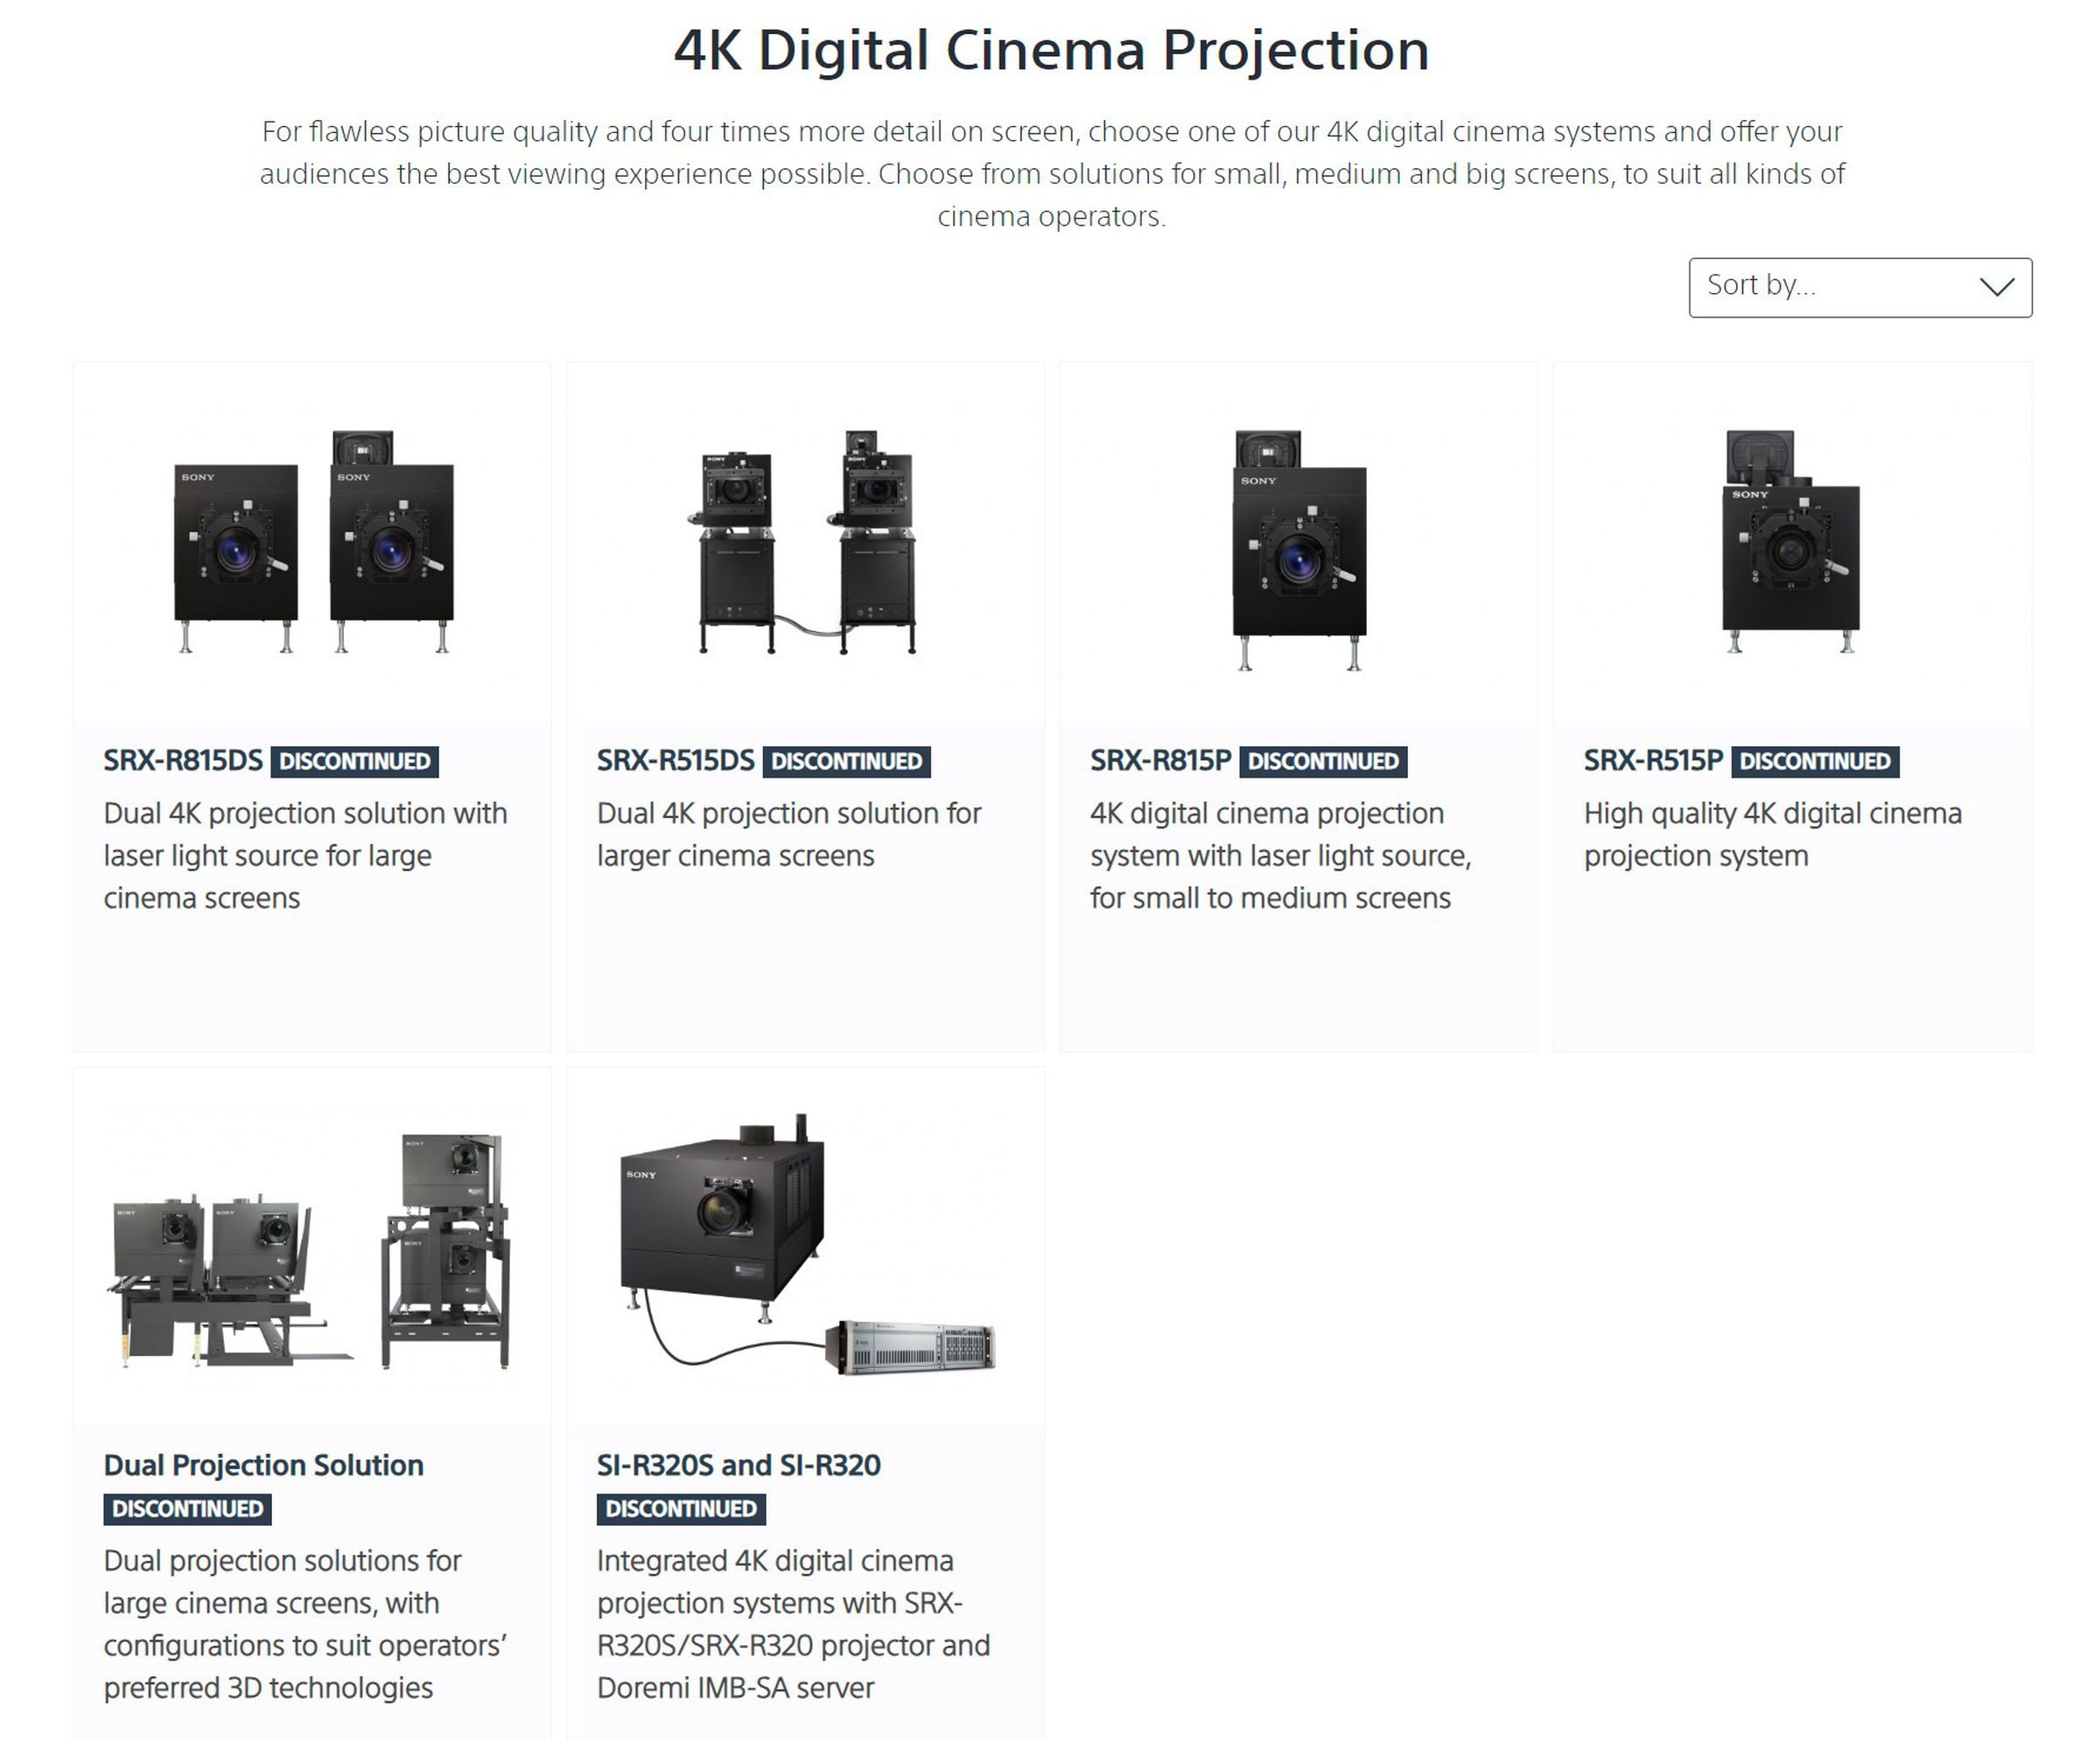 Every Sony 4K digital cinema projector is listed as discontinued.